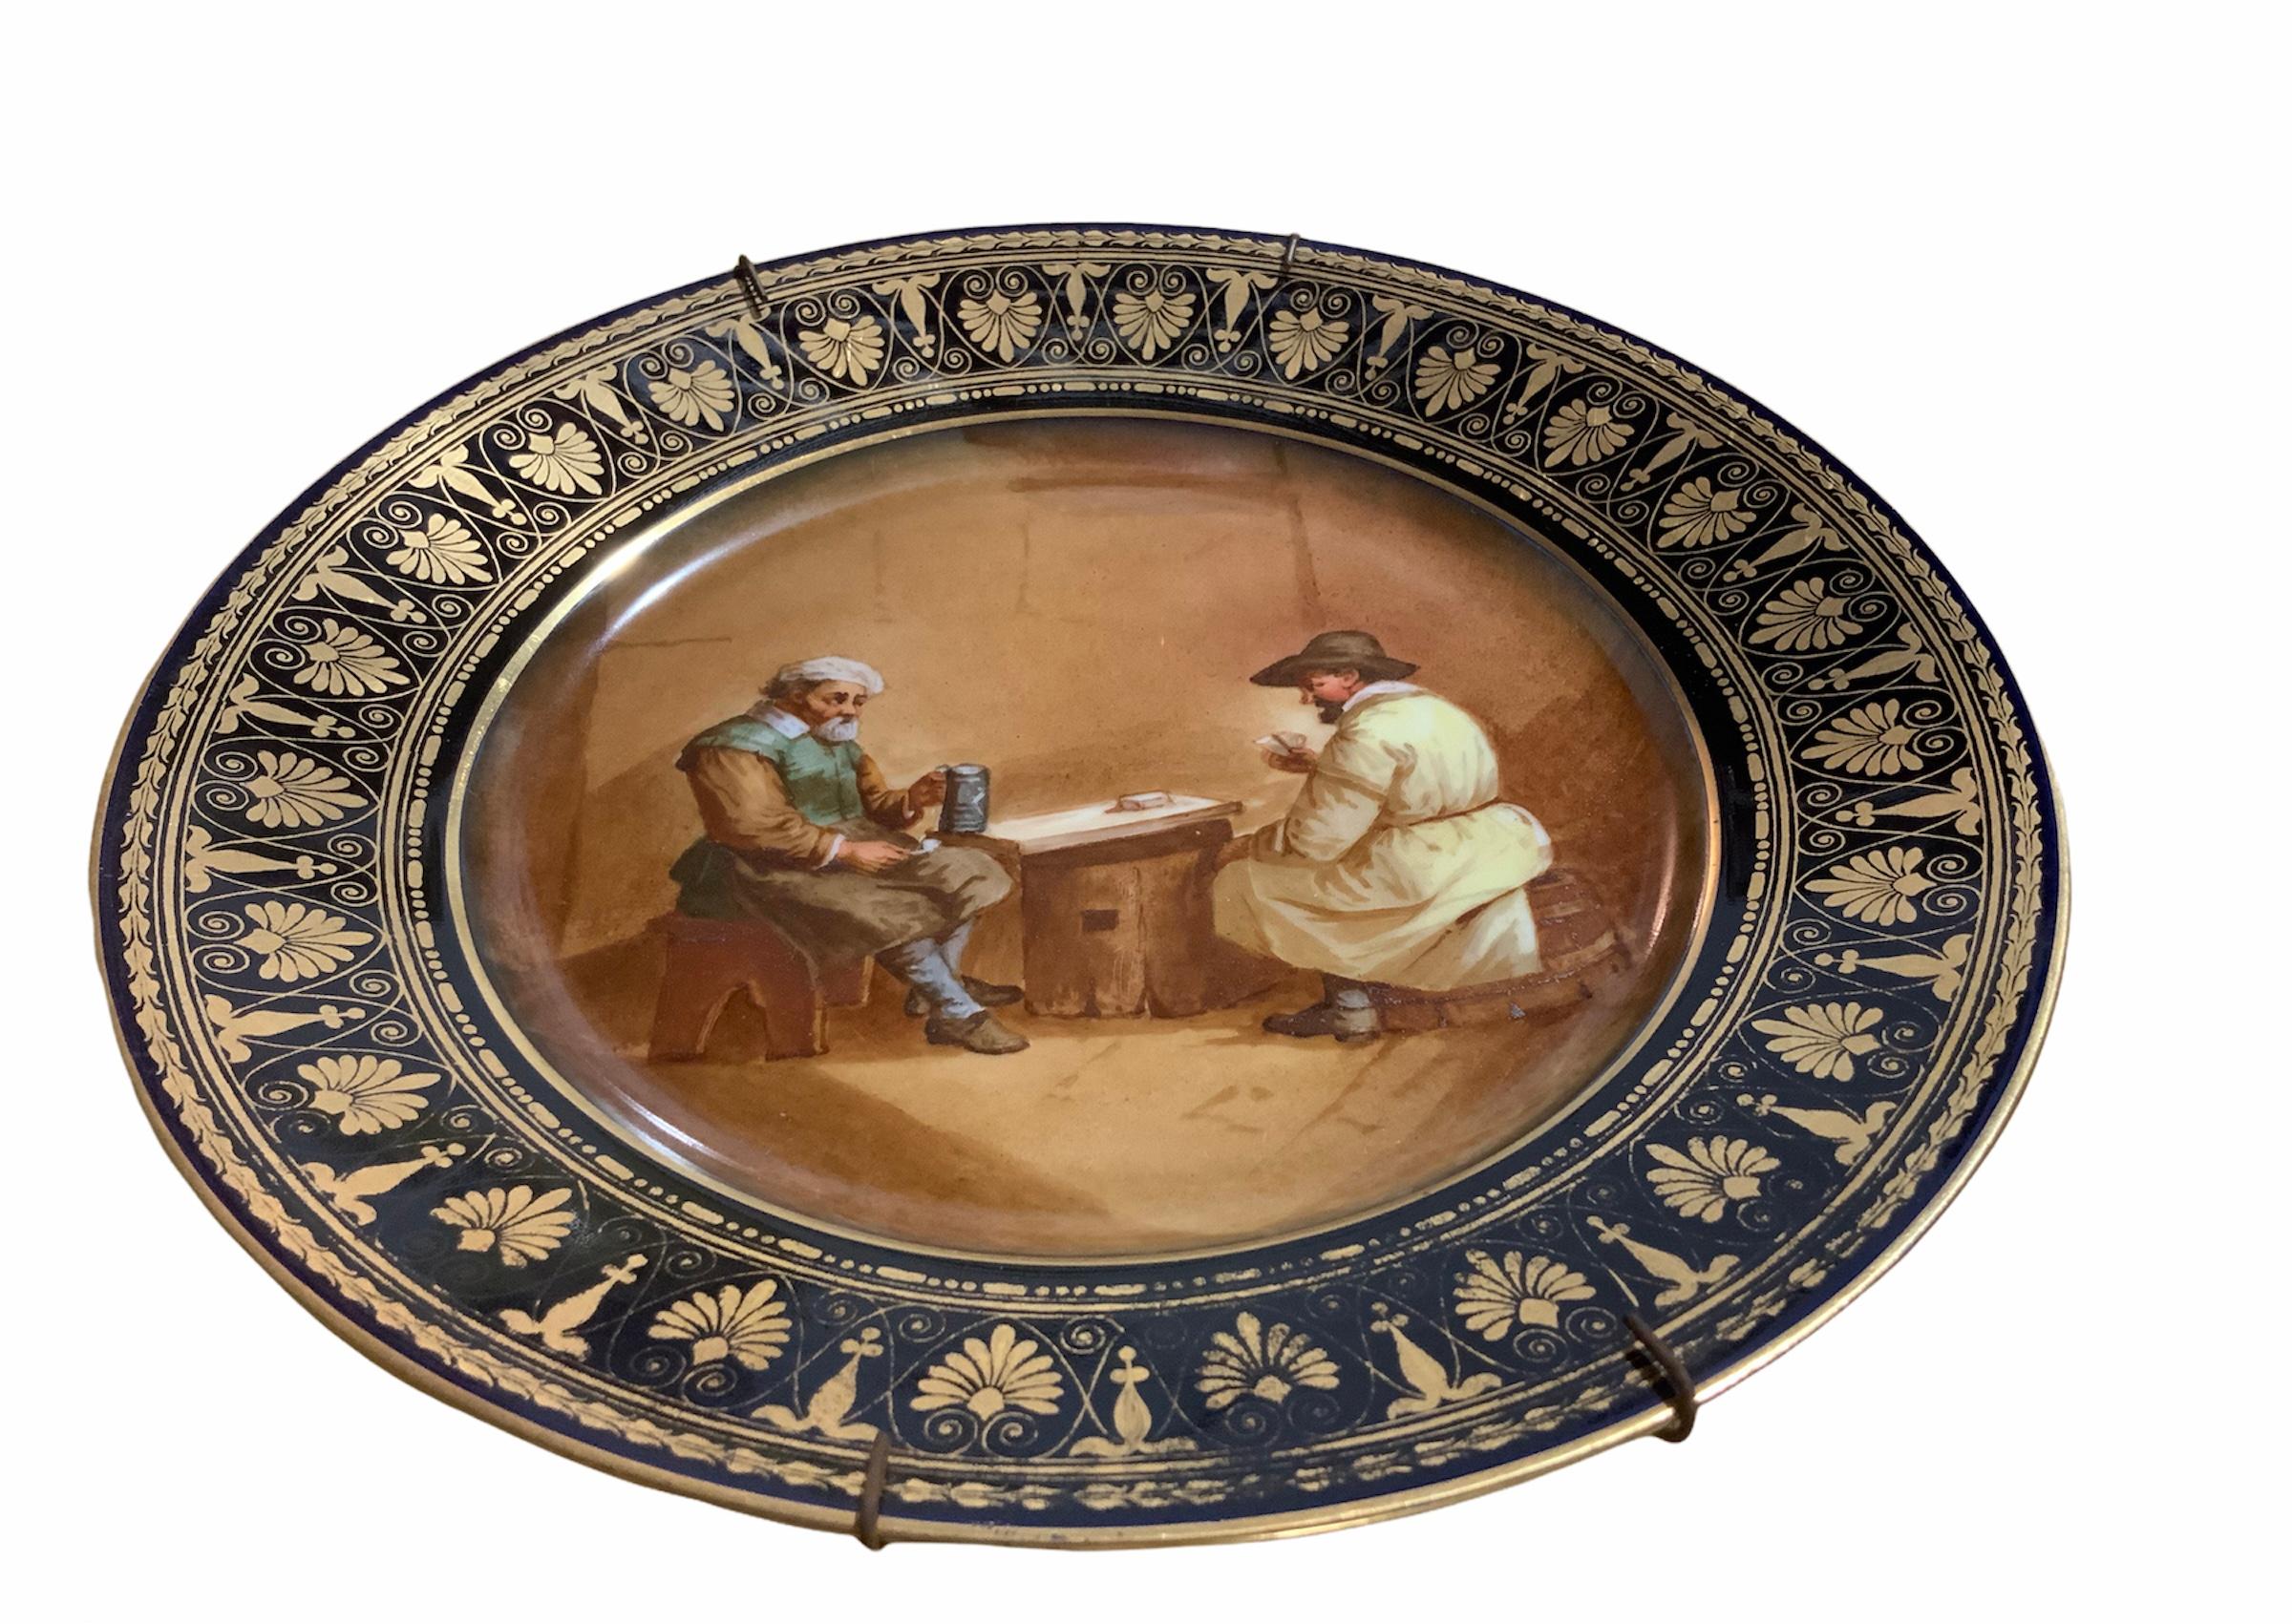 This a Chateau de Tuileries hand painted porcelain cabinet plate. It depicts a scene of a pair of country men that are sitting, one in a wood bench and the other one in a barrel while they are playing cards in a tavern. There is also a small rustic